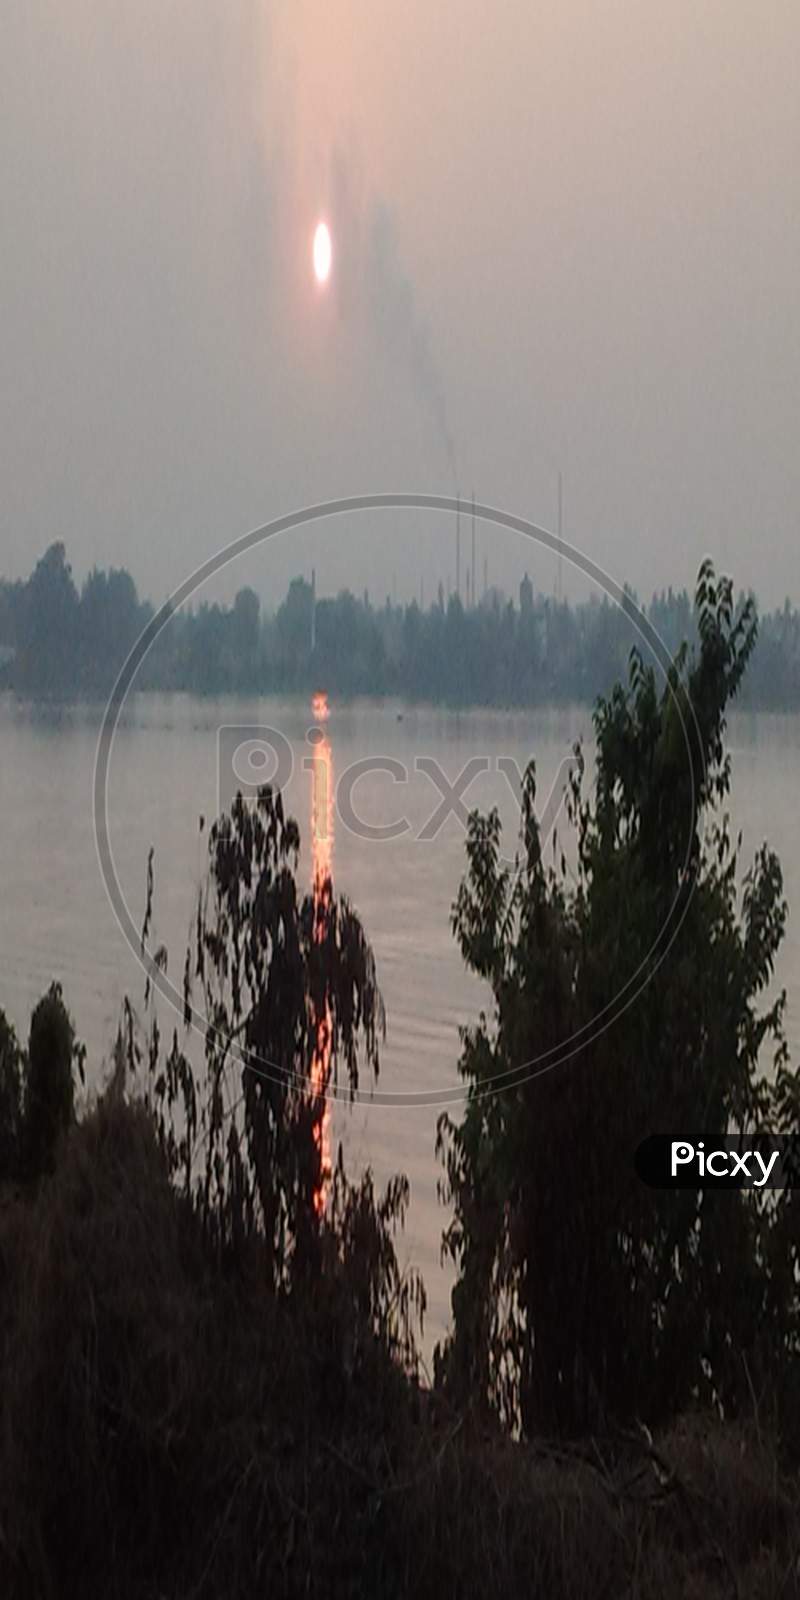 sunset,tree, evening, sky, reflection, river,hooghly river, riverside